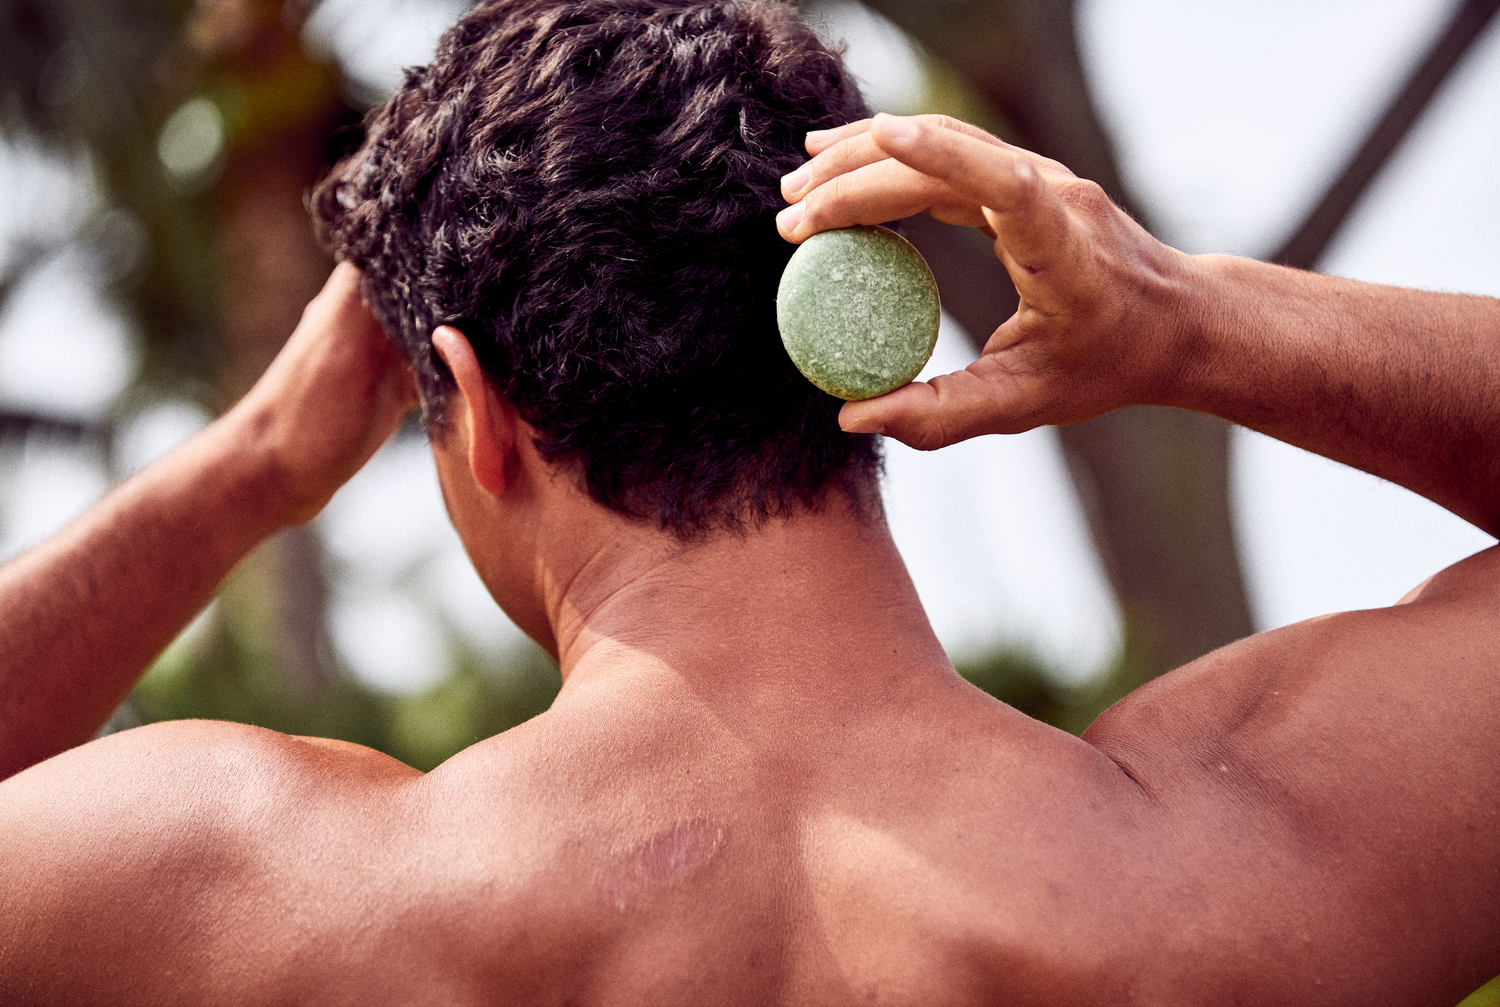 This image shows a shirtless man in an outdoor setting holding a Tea Tree and Mint Solid Argan Oil Shampoo Bar next to his head. These are a part of Desesh's range of zero waste, plastic free, eco friendly, more sustainable personal care and everyday essential products. 